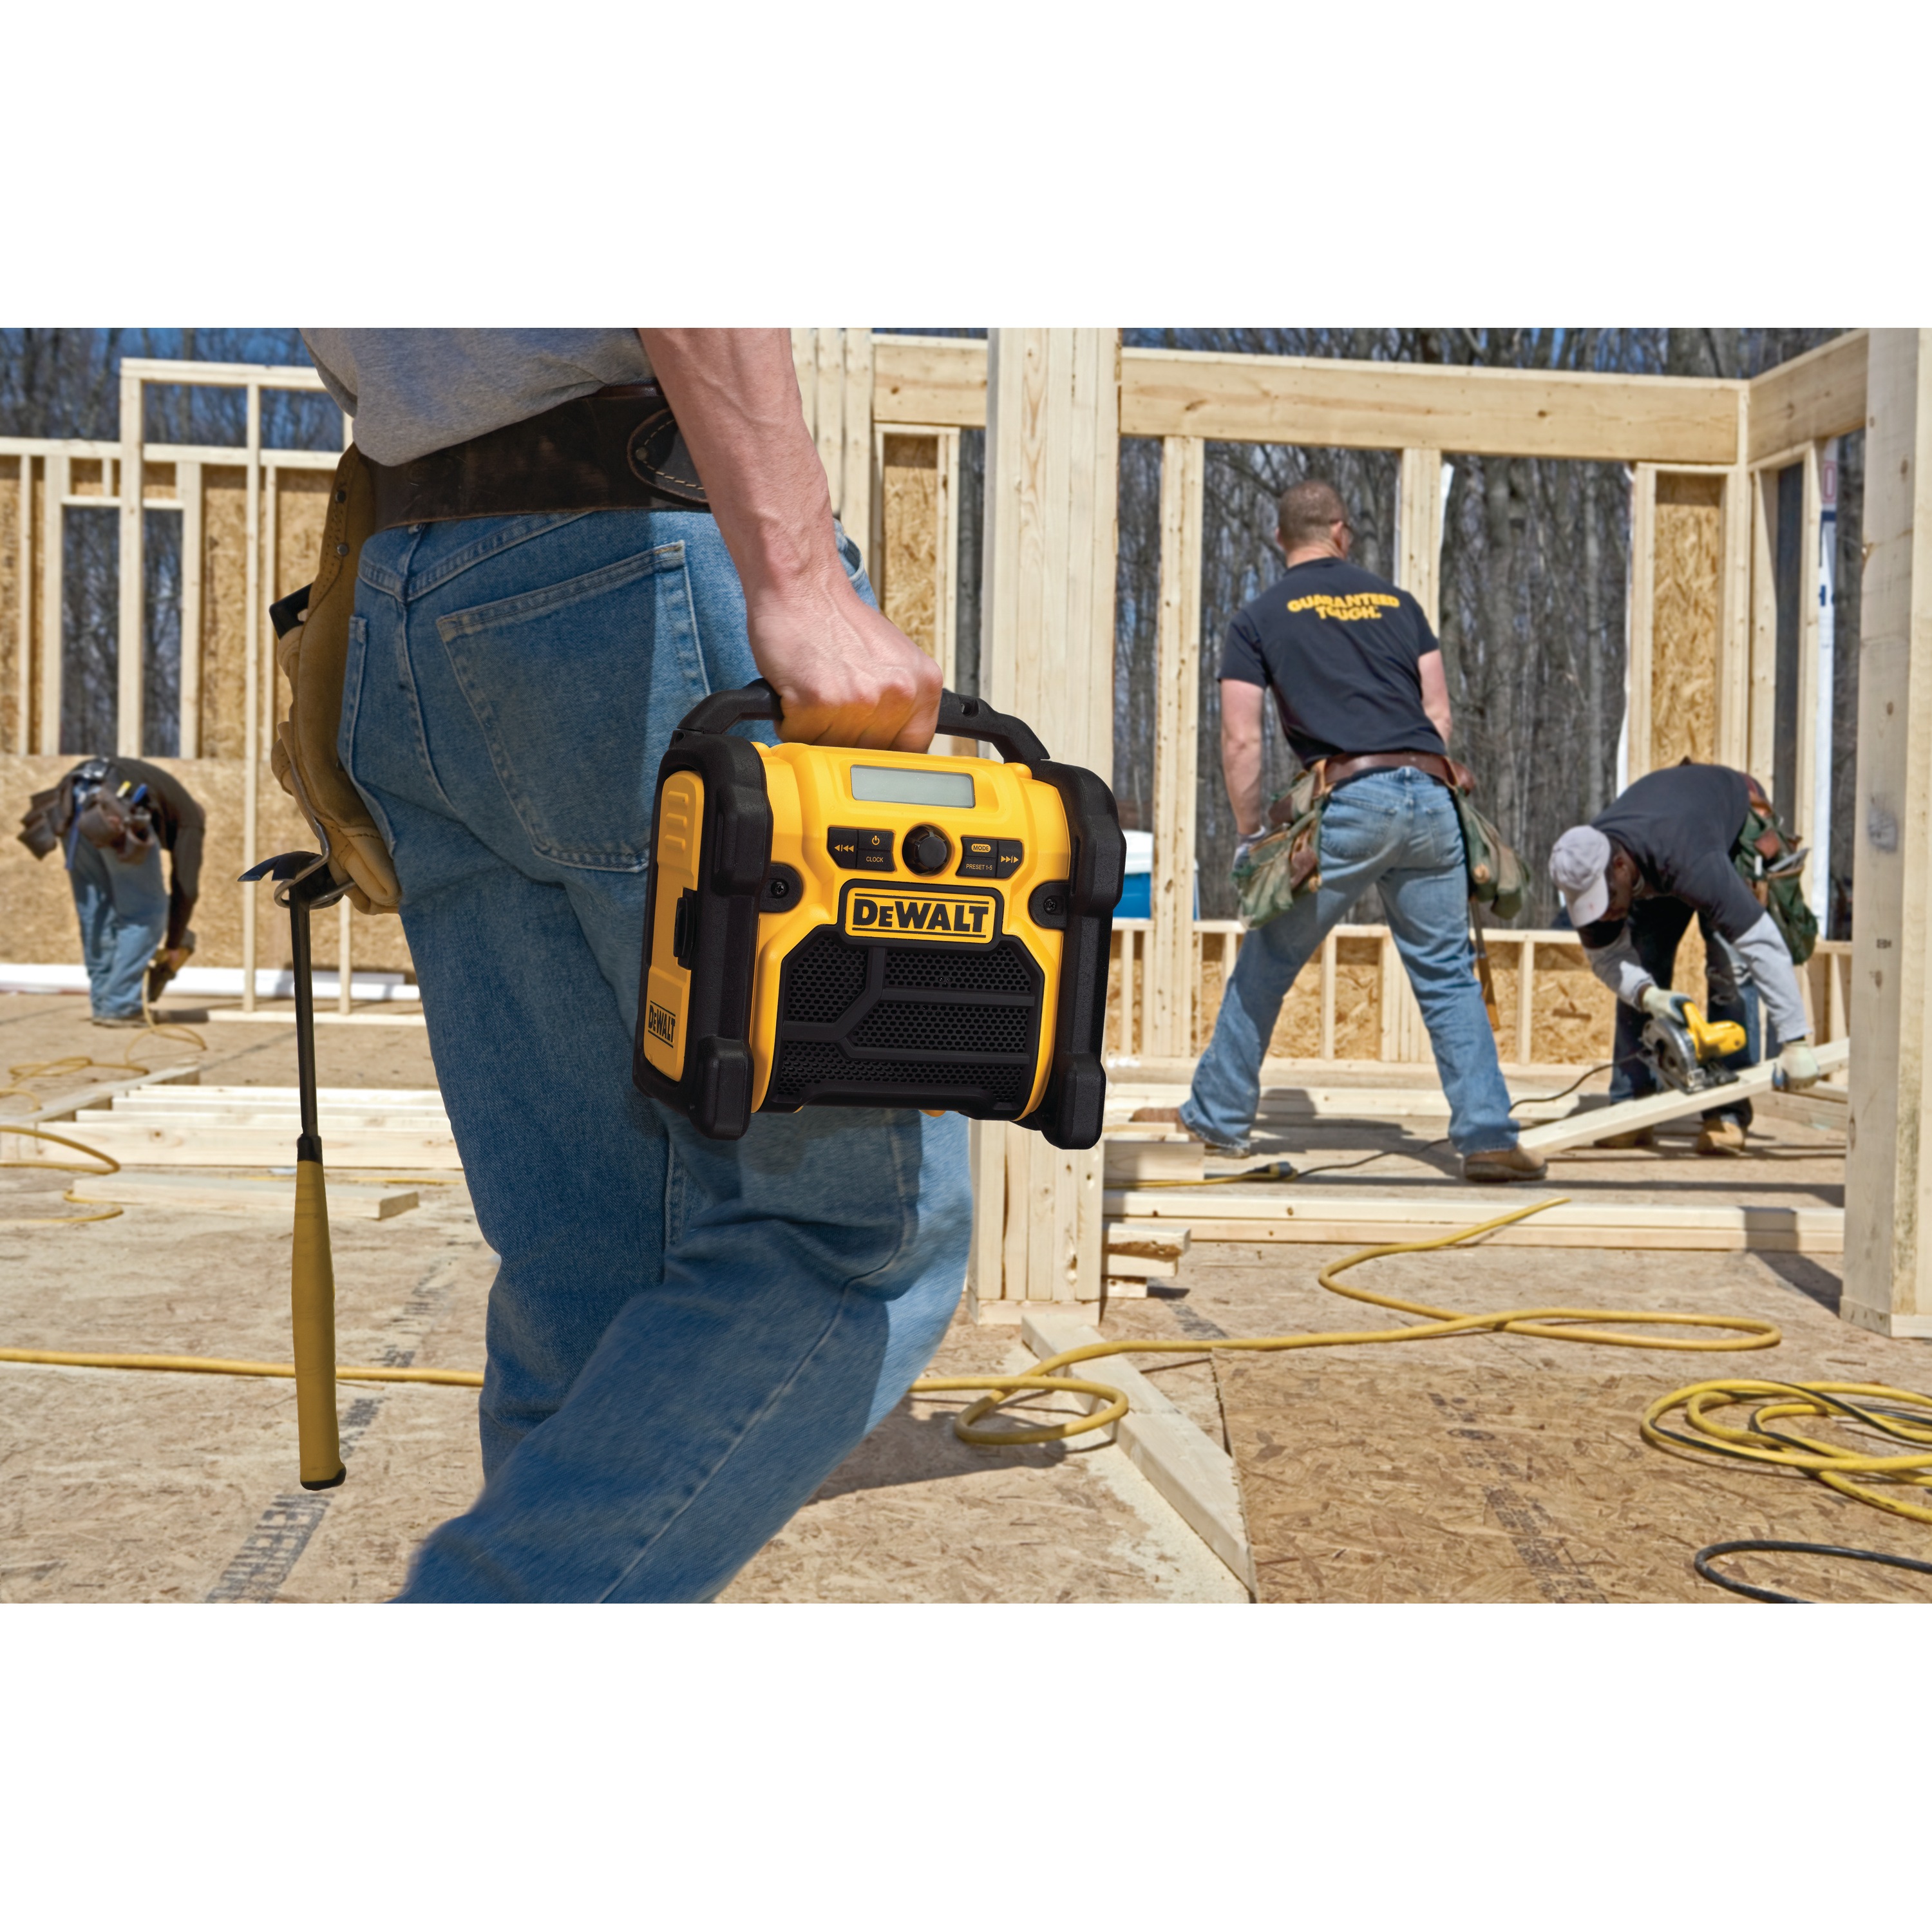 Compact Worksite Radio is being carried by a person to optimize user's productivity.